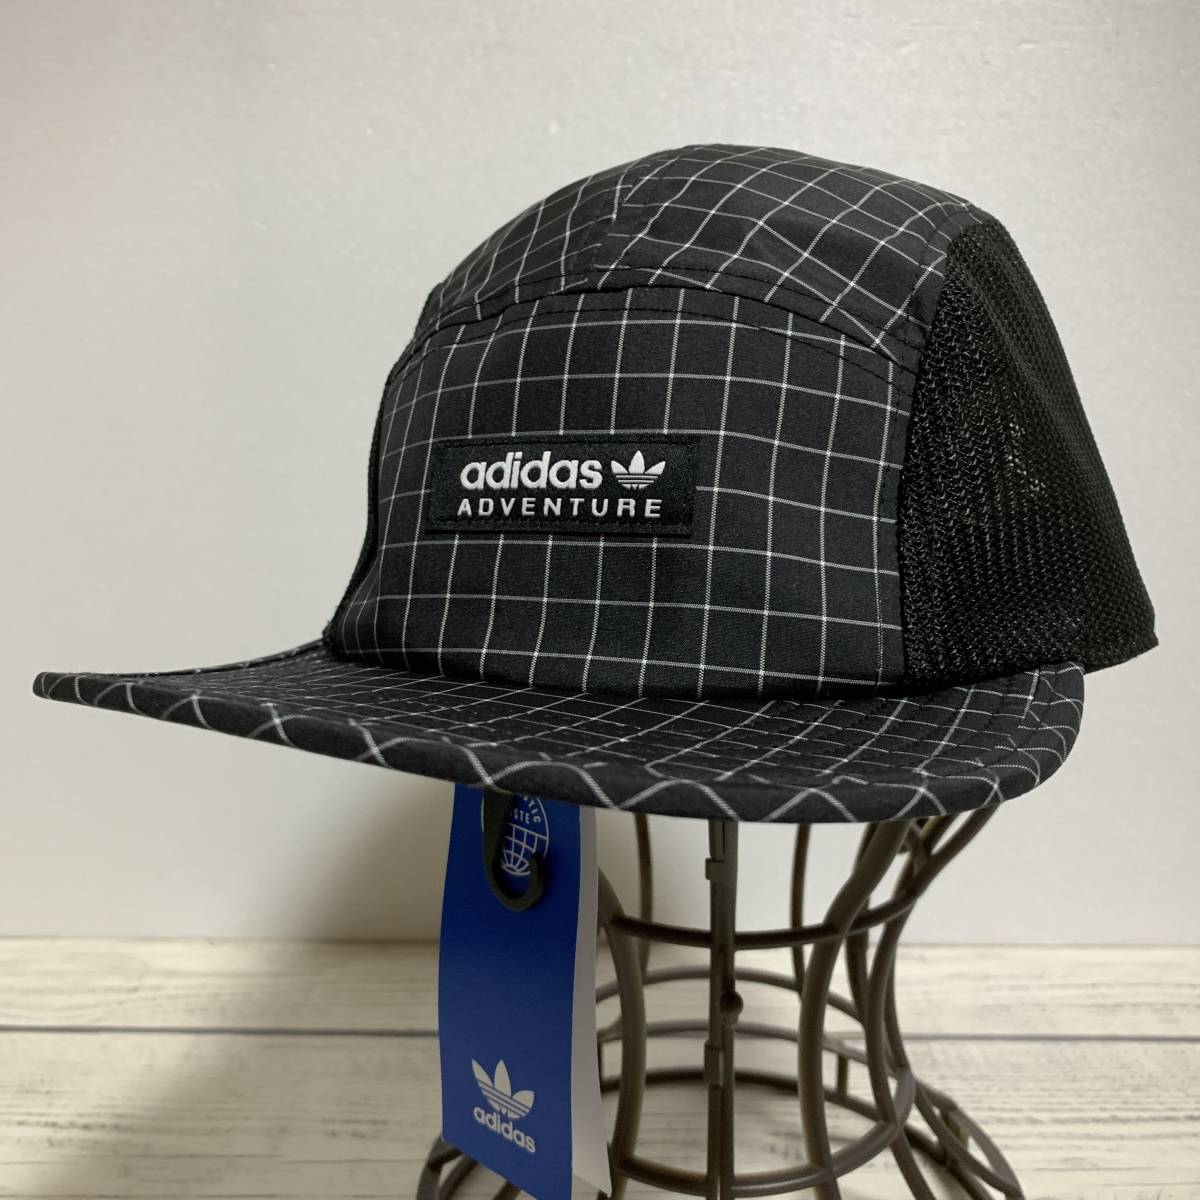 adidas ADVENTURE ( Adidas * adventure ) - side mesh jet cap 5 panel 57-60cm mountain climbing man and woman use ( tag attaching not yet have on goods )